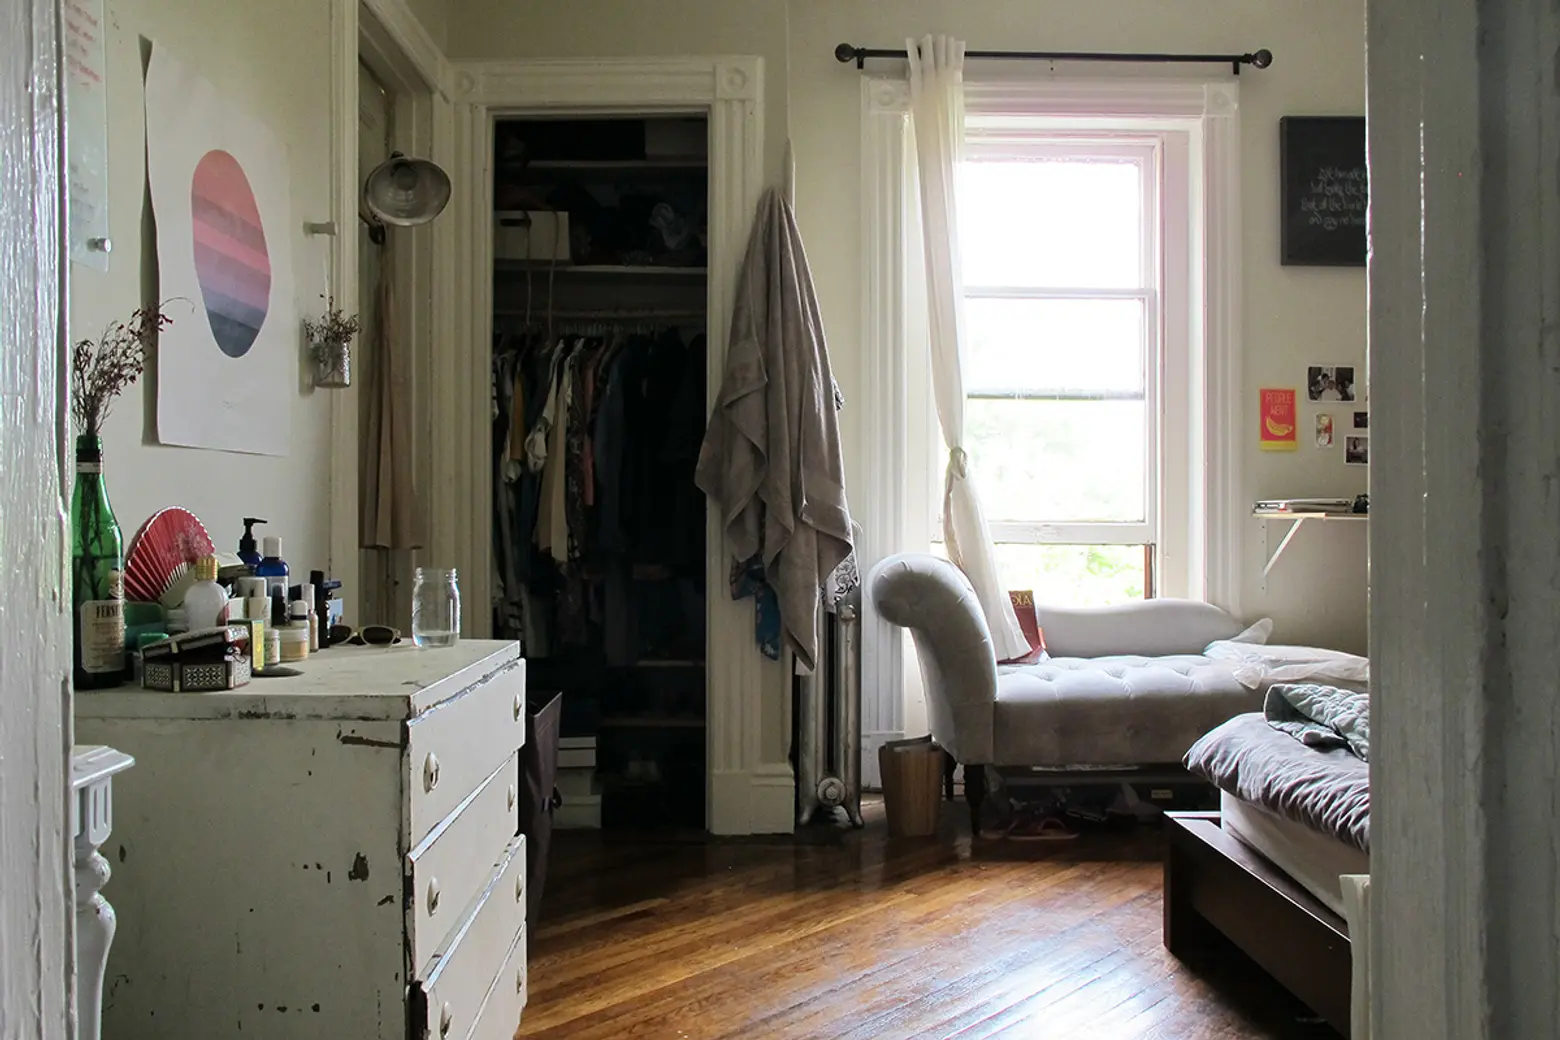 jonathan wing, new york roommate search, brooklyn apartments for rent, new your apartments for rent, brooklyn rooms for rent, new york rooms for rent, 159 willoughby avenue, fort greene apartments, row house fort greene